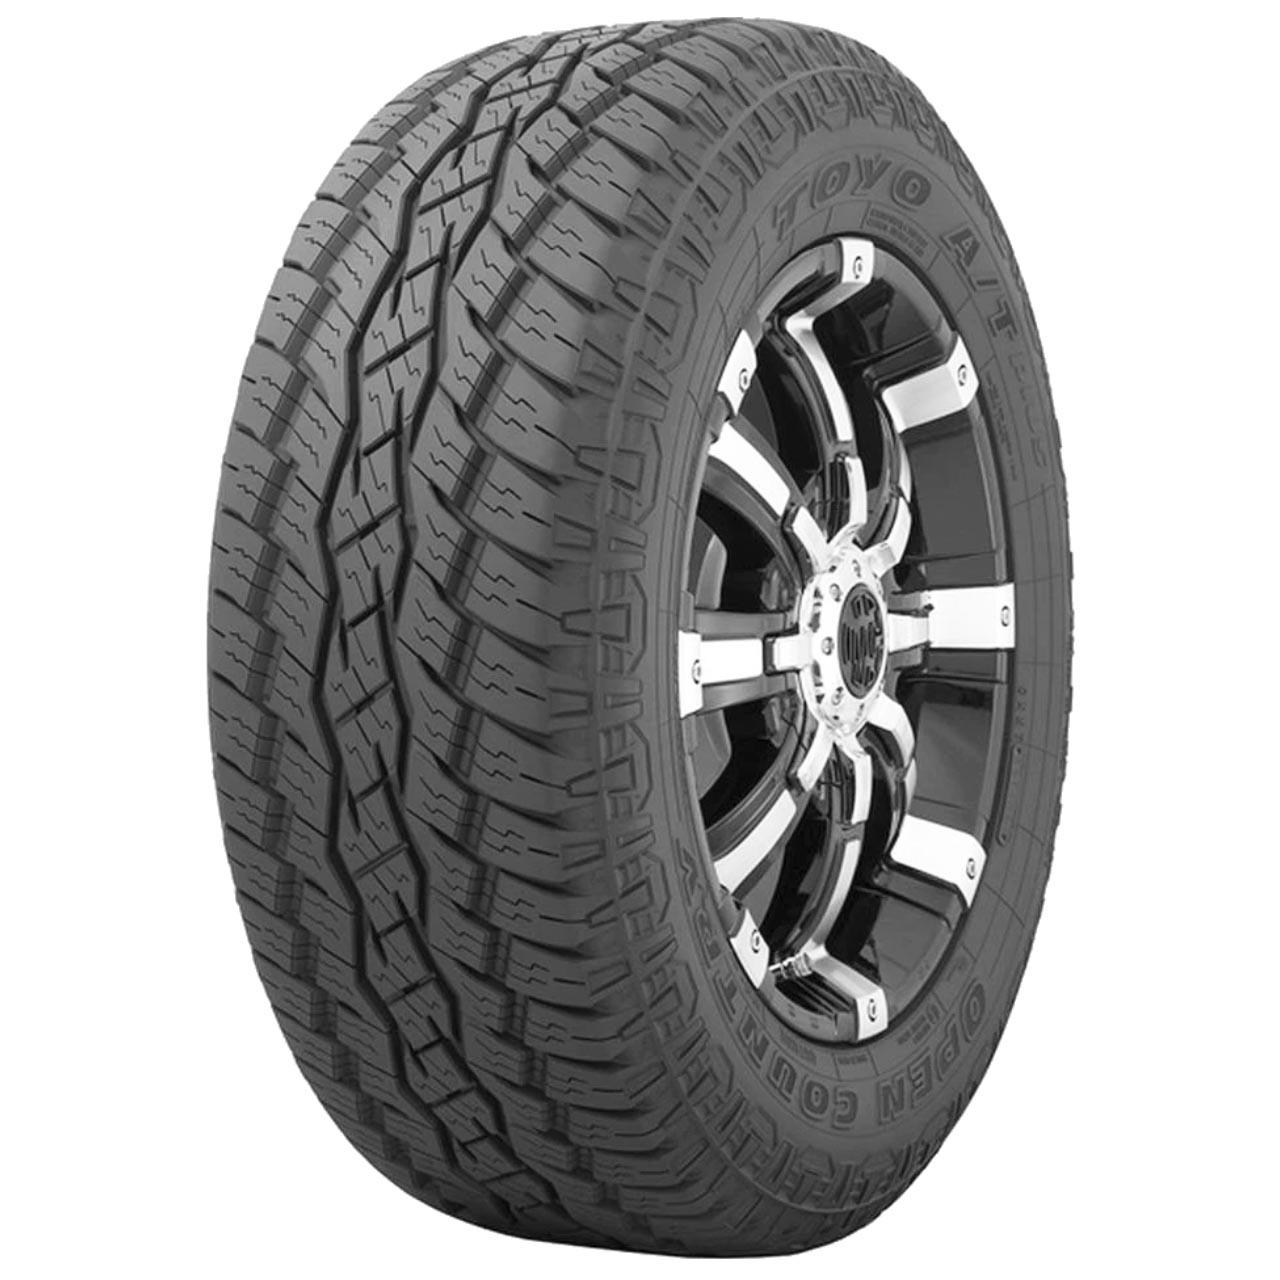 Toyo Open Country AT Plus 245/70R17 114H XL